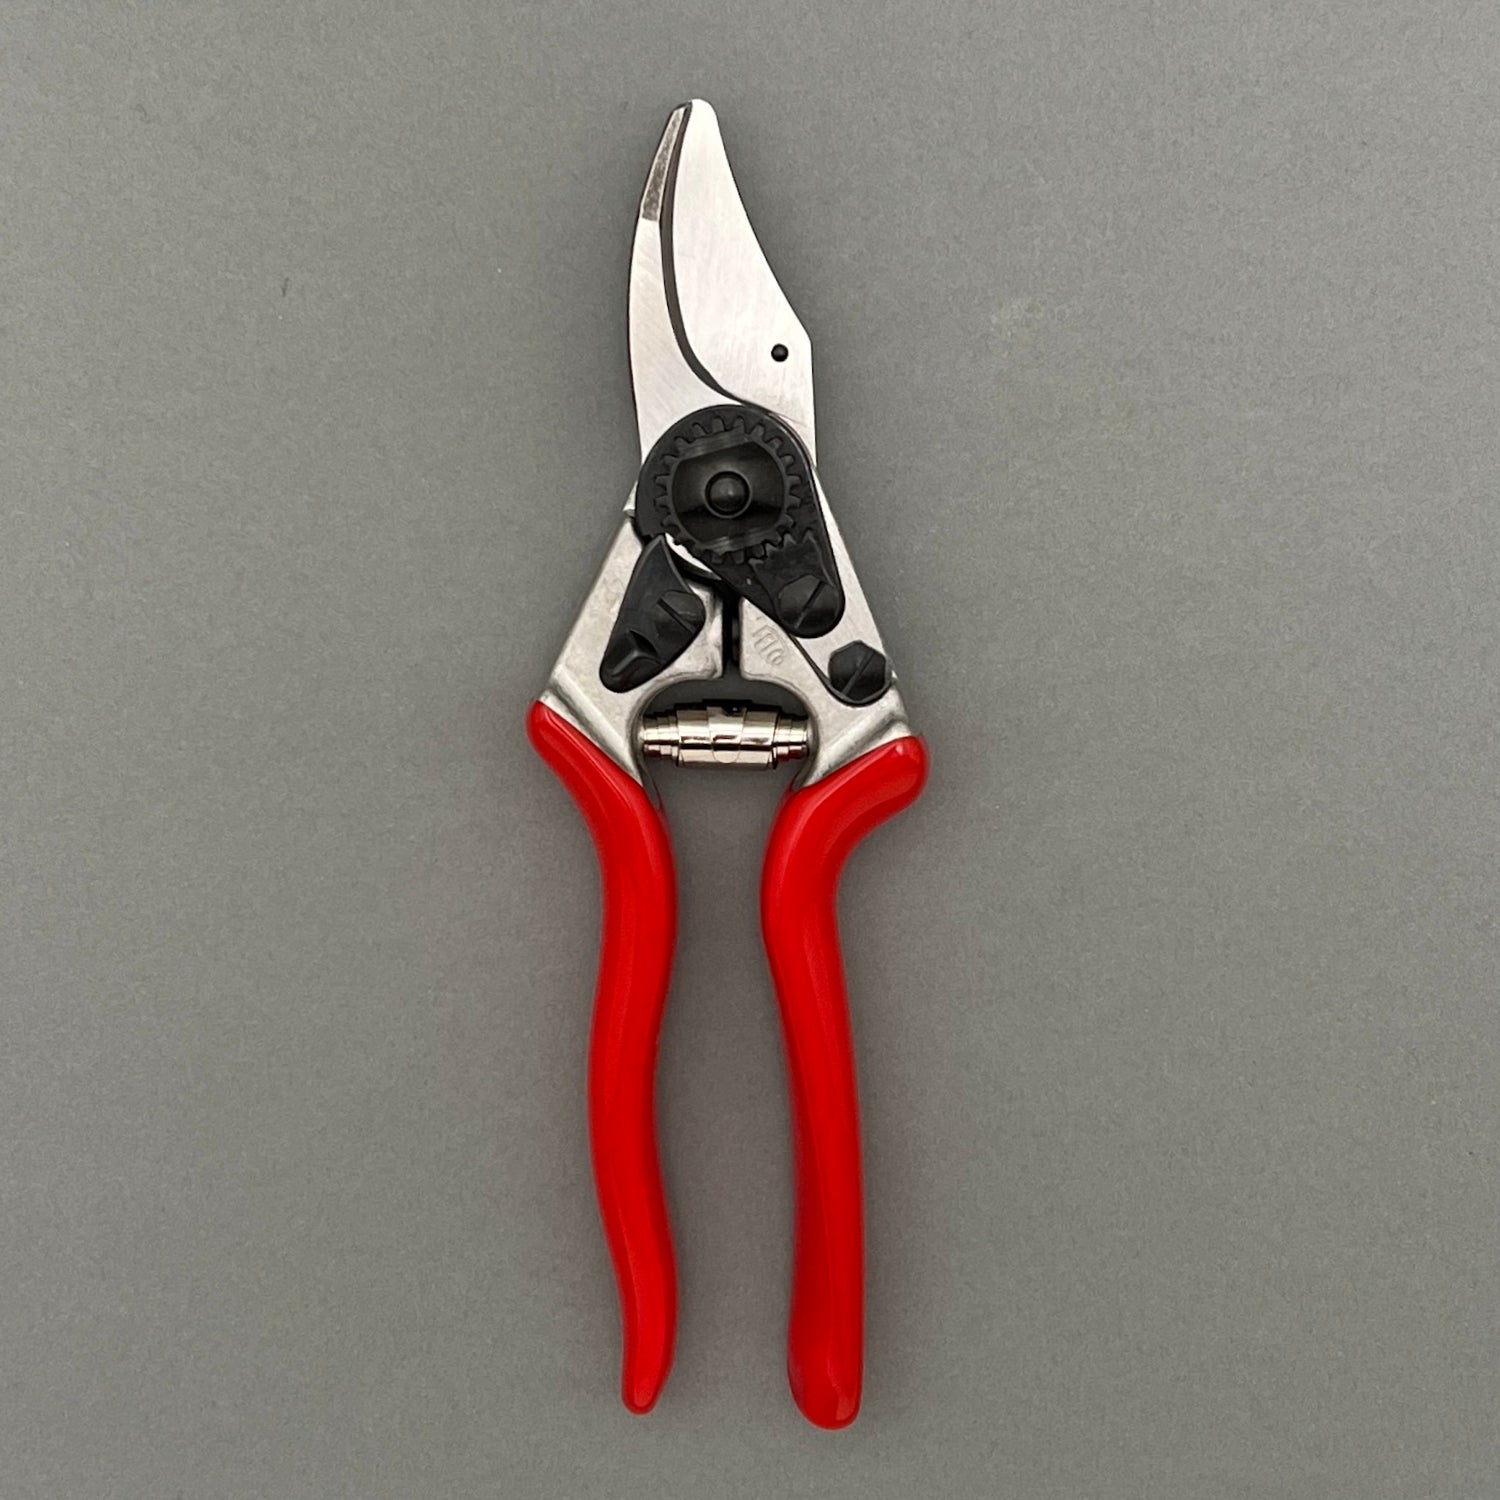 A pair of small steel clippers with a red handle in a closed position laying on a gray background